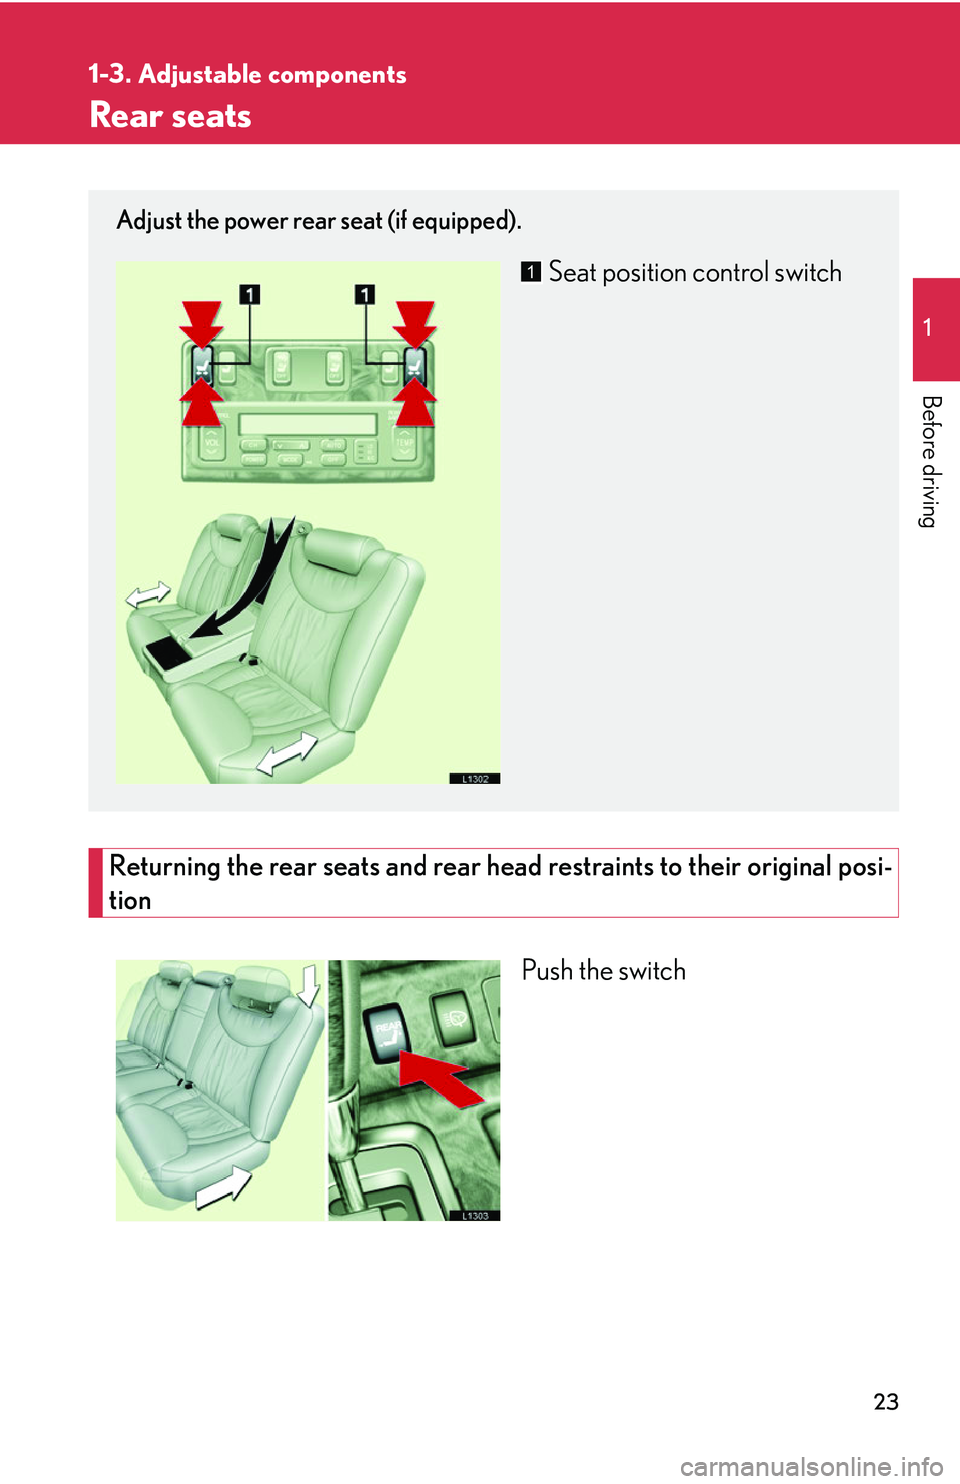 LEXUS LS430 2006 Owners Guide 23
1
1-3. Adjustable components
Before driving
Rear seats
Returning the rear seats and rear head restraints to their original posi-
tion
Push the switch
Adjust the power rear seat (if equipped).
Seat 